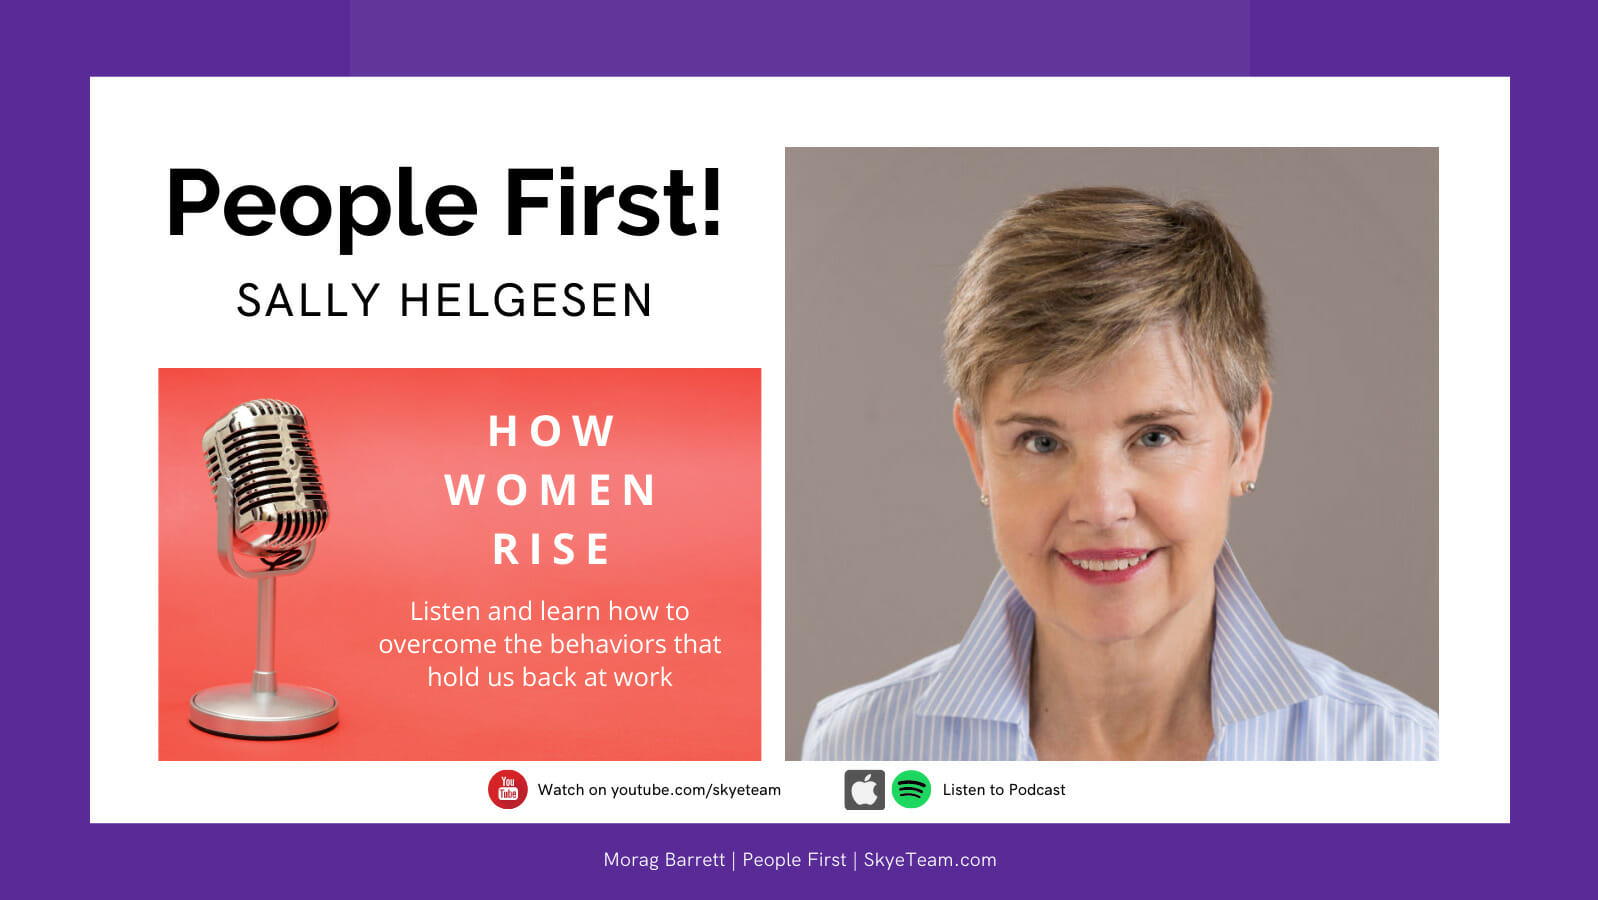 People First! Sally Helgesen "How Women Rise: Listen and learn how to overcome the behaviors that hold us back at work."